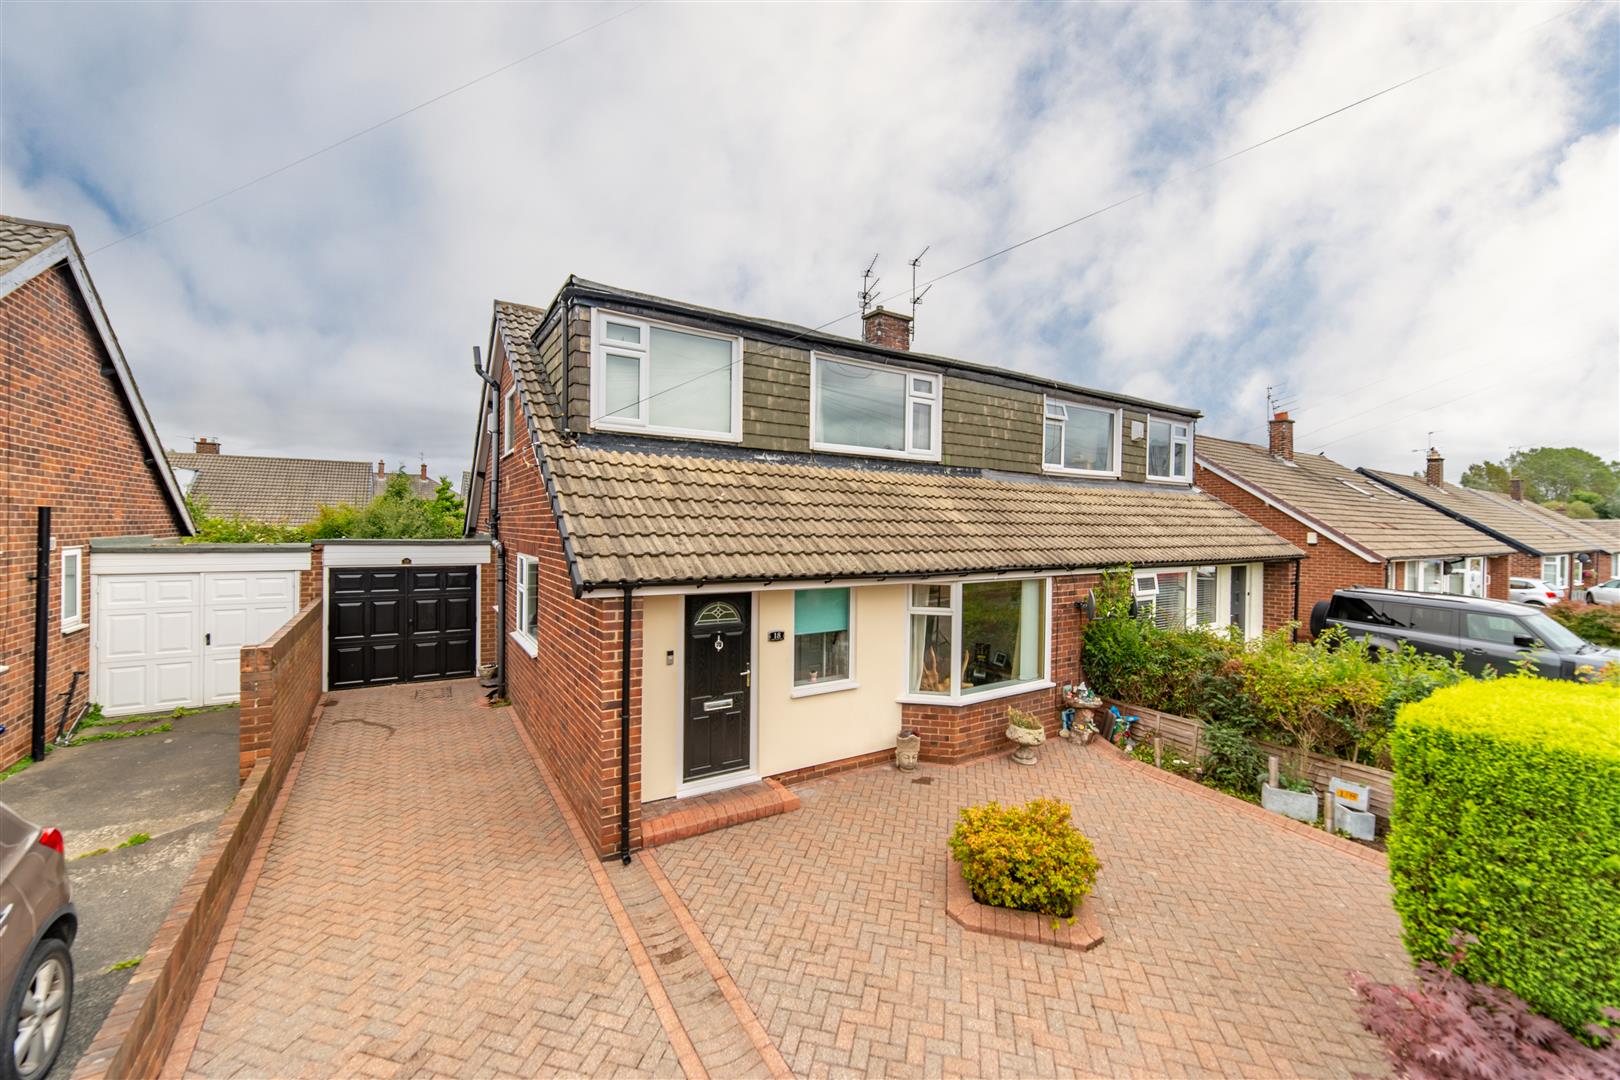 3 bed semi-detached bungalow for sale in Whitton Way, Gosforth, NE3 